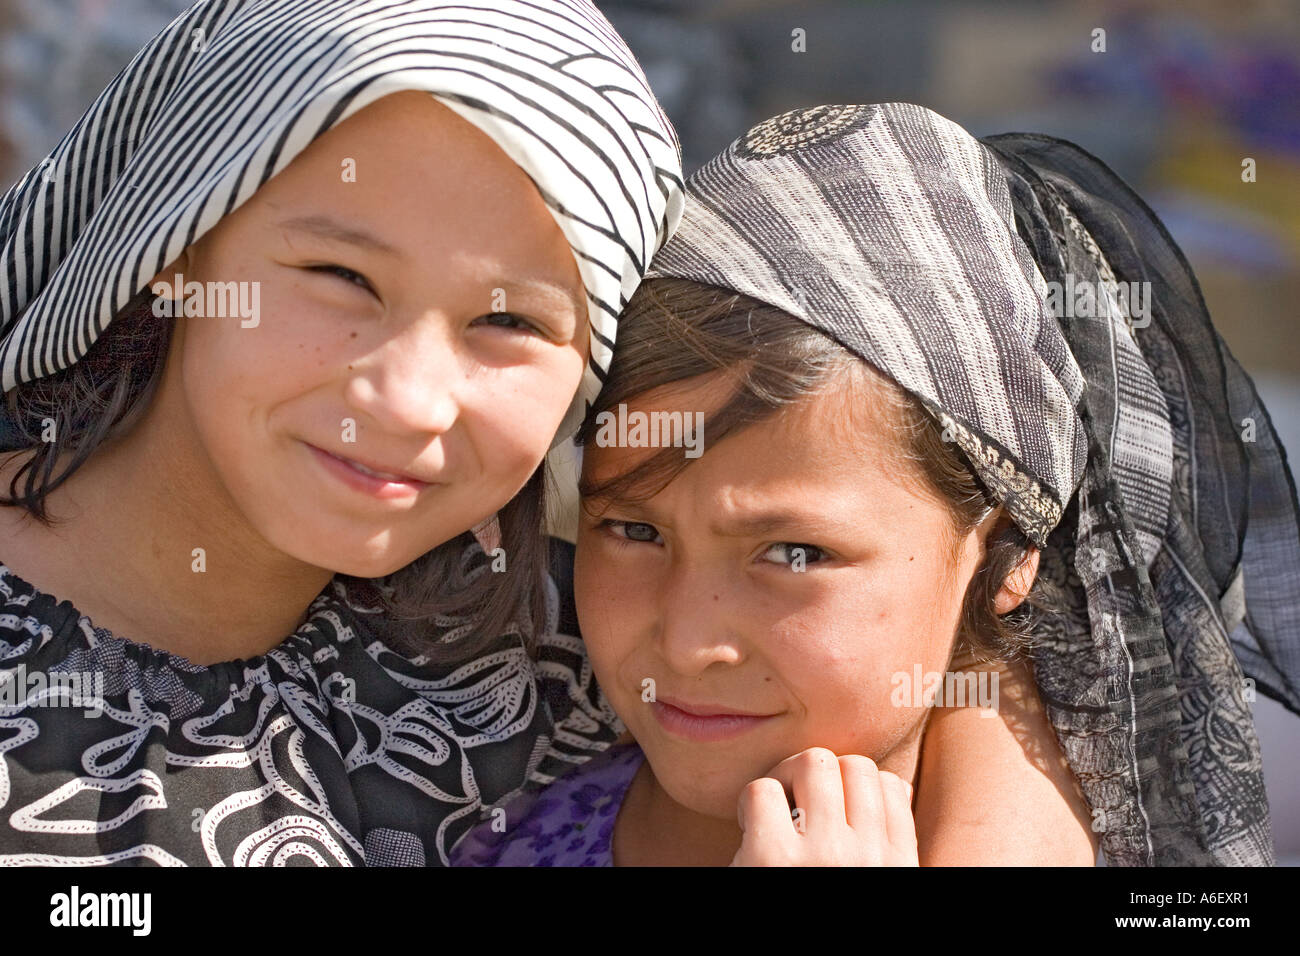 Young Girls in Kashgar China c Guenter Gollnick email info scenic vision de Stock Photo